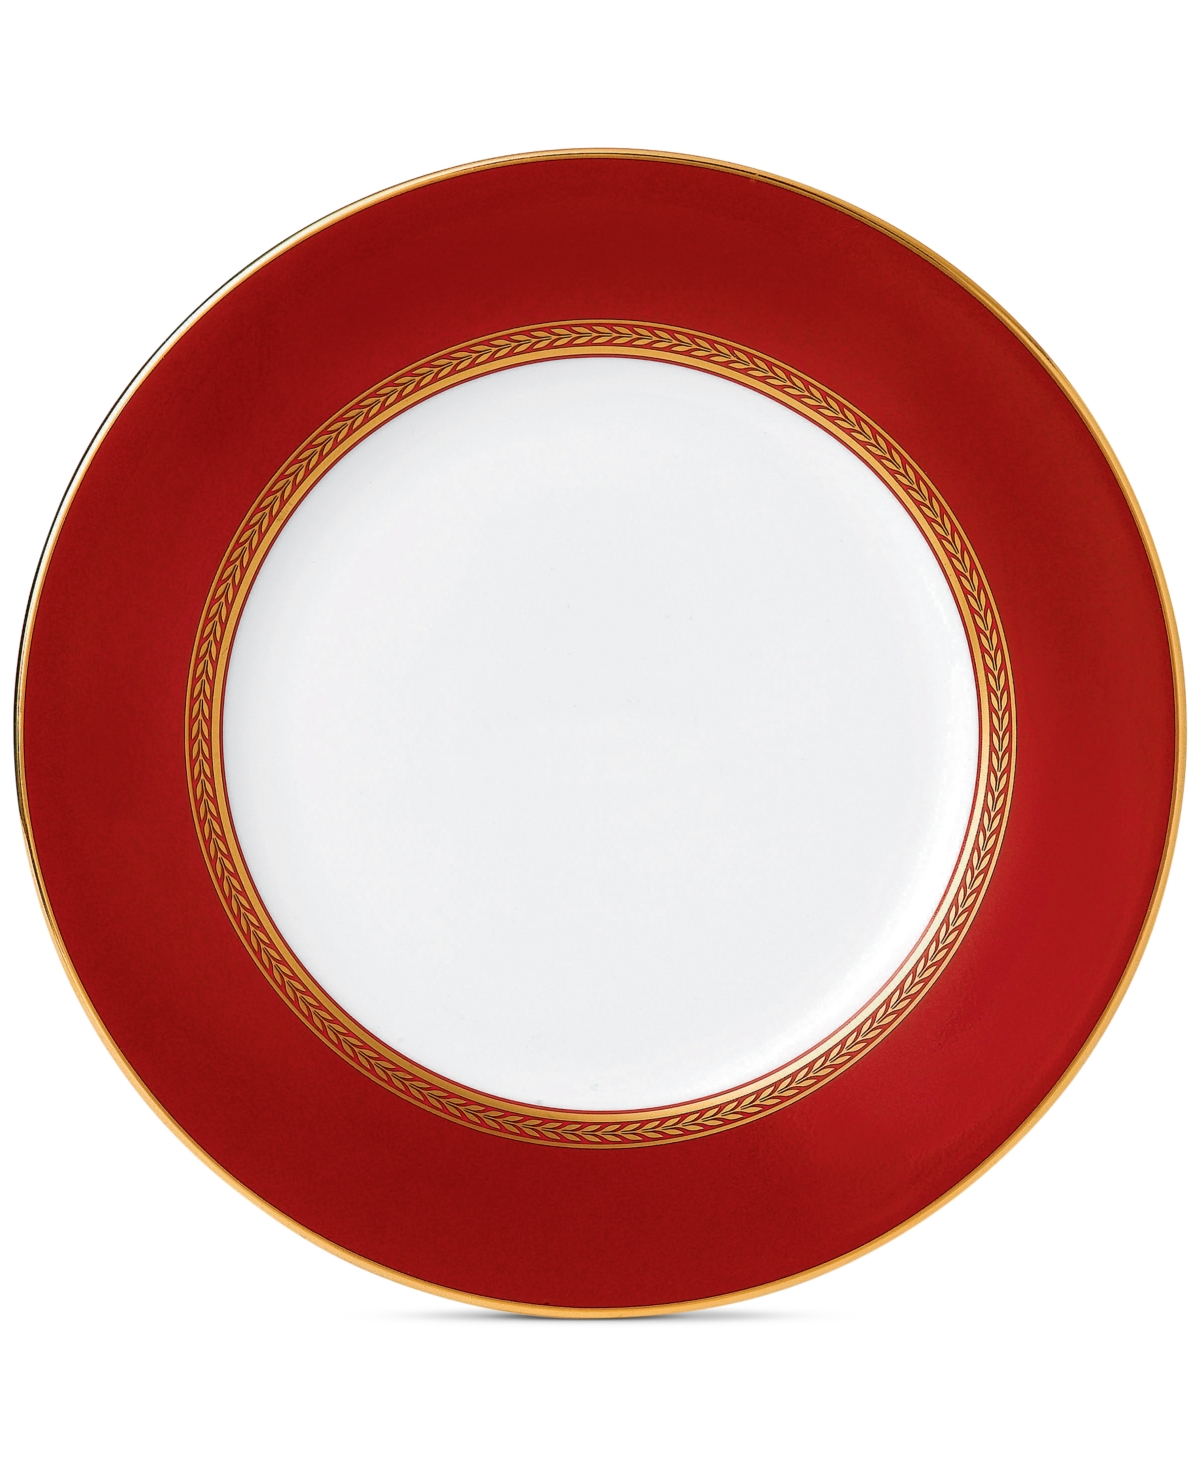 Wedgwood Renaissance Red Salad Plate In No Color